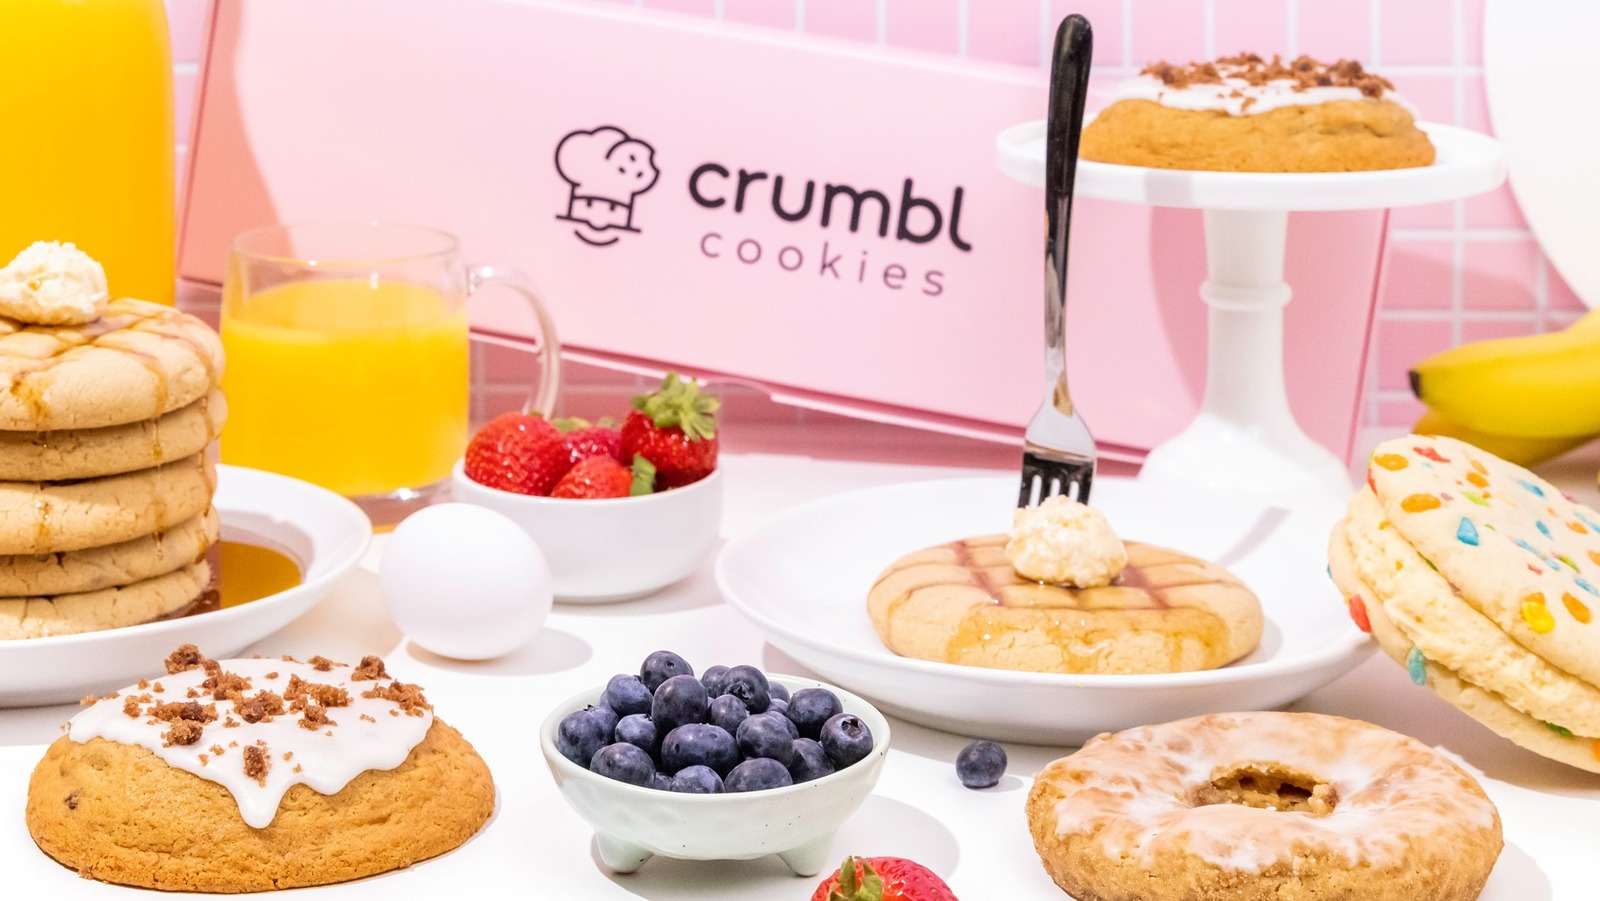 12 Things You Might Not Know About Crumbl Cookies